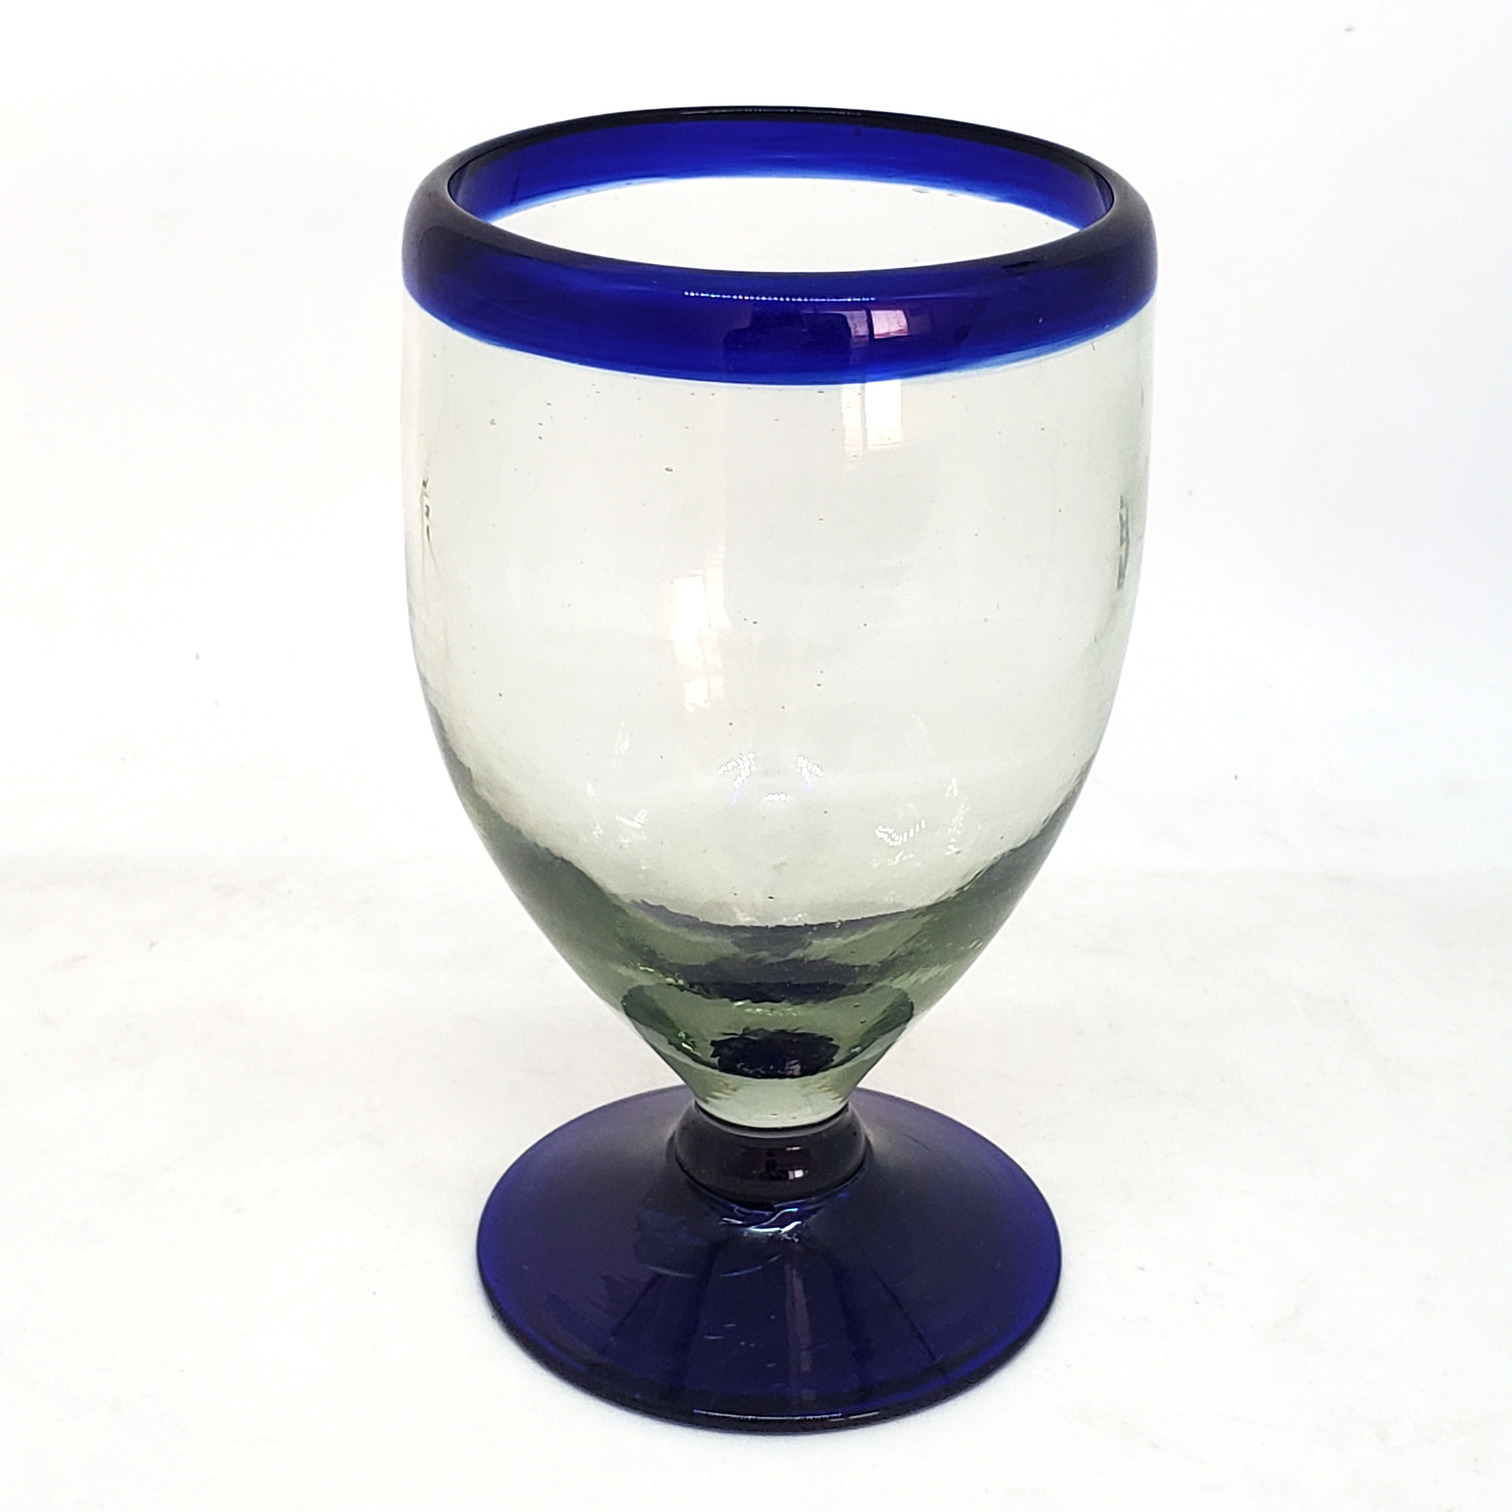 Wholesale Cobalt Blue Rim Glassware / Cobalt Blue Rim 12 oz Short Stem Wine Glasses  / Add sophistication to your table with these short stem all-purpose wine glasses. Each bordered with a beautiful blue rim.